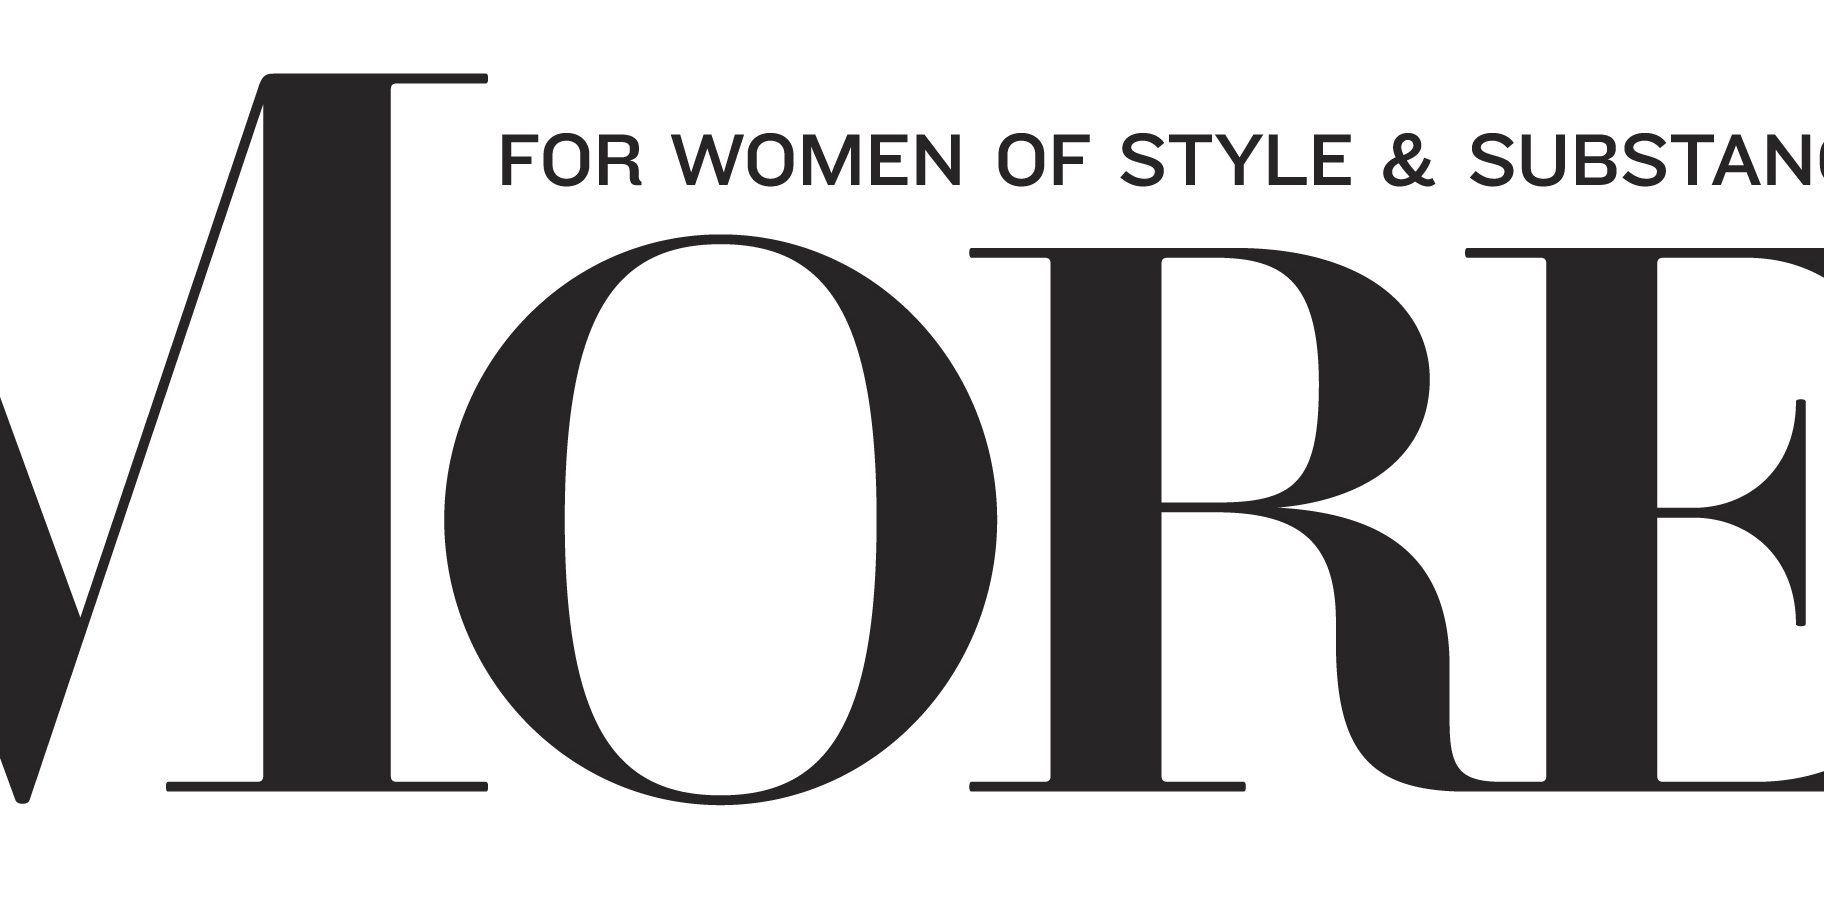 More for women of style and substance logo